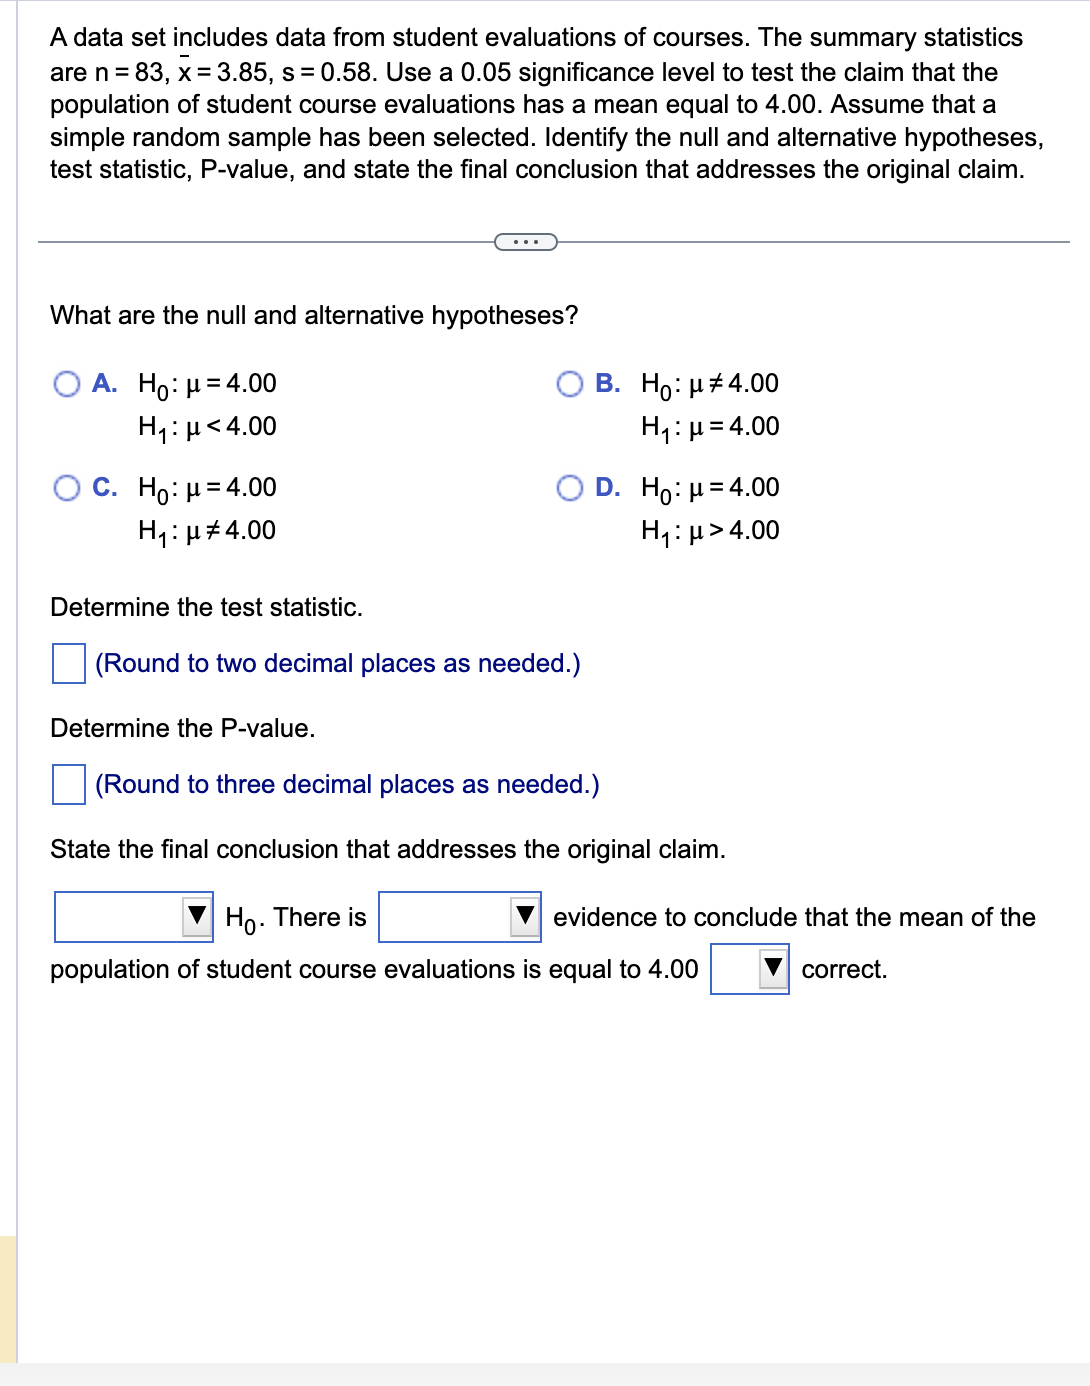 A data set includes data from student evaluations of courses. The summary statistics
are n = 83, x = 3.85, s = 0.58. Use a 0.05 significance level to test the claim that the
population of student course evaluations has a mean equal to 4.00. Assume that a
simple random sample has been selected. Identify the null and alternative hypotheses,
test statistic, P-value, and state the final conclusion that addresses the original claim.
What are the null and alternative hypotheses?
A. Ho: μ = 4.00
H₁: μ< 4.00
C. Ho: μ = 4.00
H₁: μ#4.00
O B. Ho: μ#4.00
H₁: μ = 4.00
O D. Ho: μ= 4.00
H₁:μ>4.00
Determine the test statistic.
(Round to two decimal places as needed.)
Determine the P-value.
(Round to three decimal places as needed.)
State the final conclusion that addresses the original claim.
Ho. There is
population of student course evaluations is equal to 4.00
evidence to conclude that the mean of the
correct.